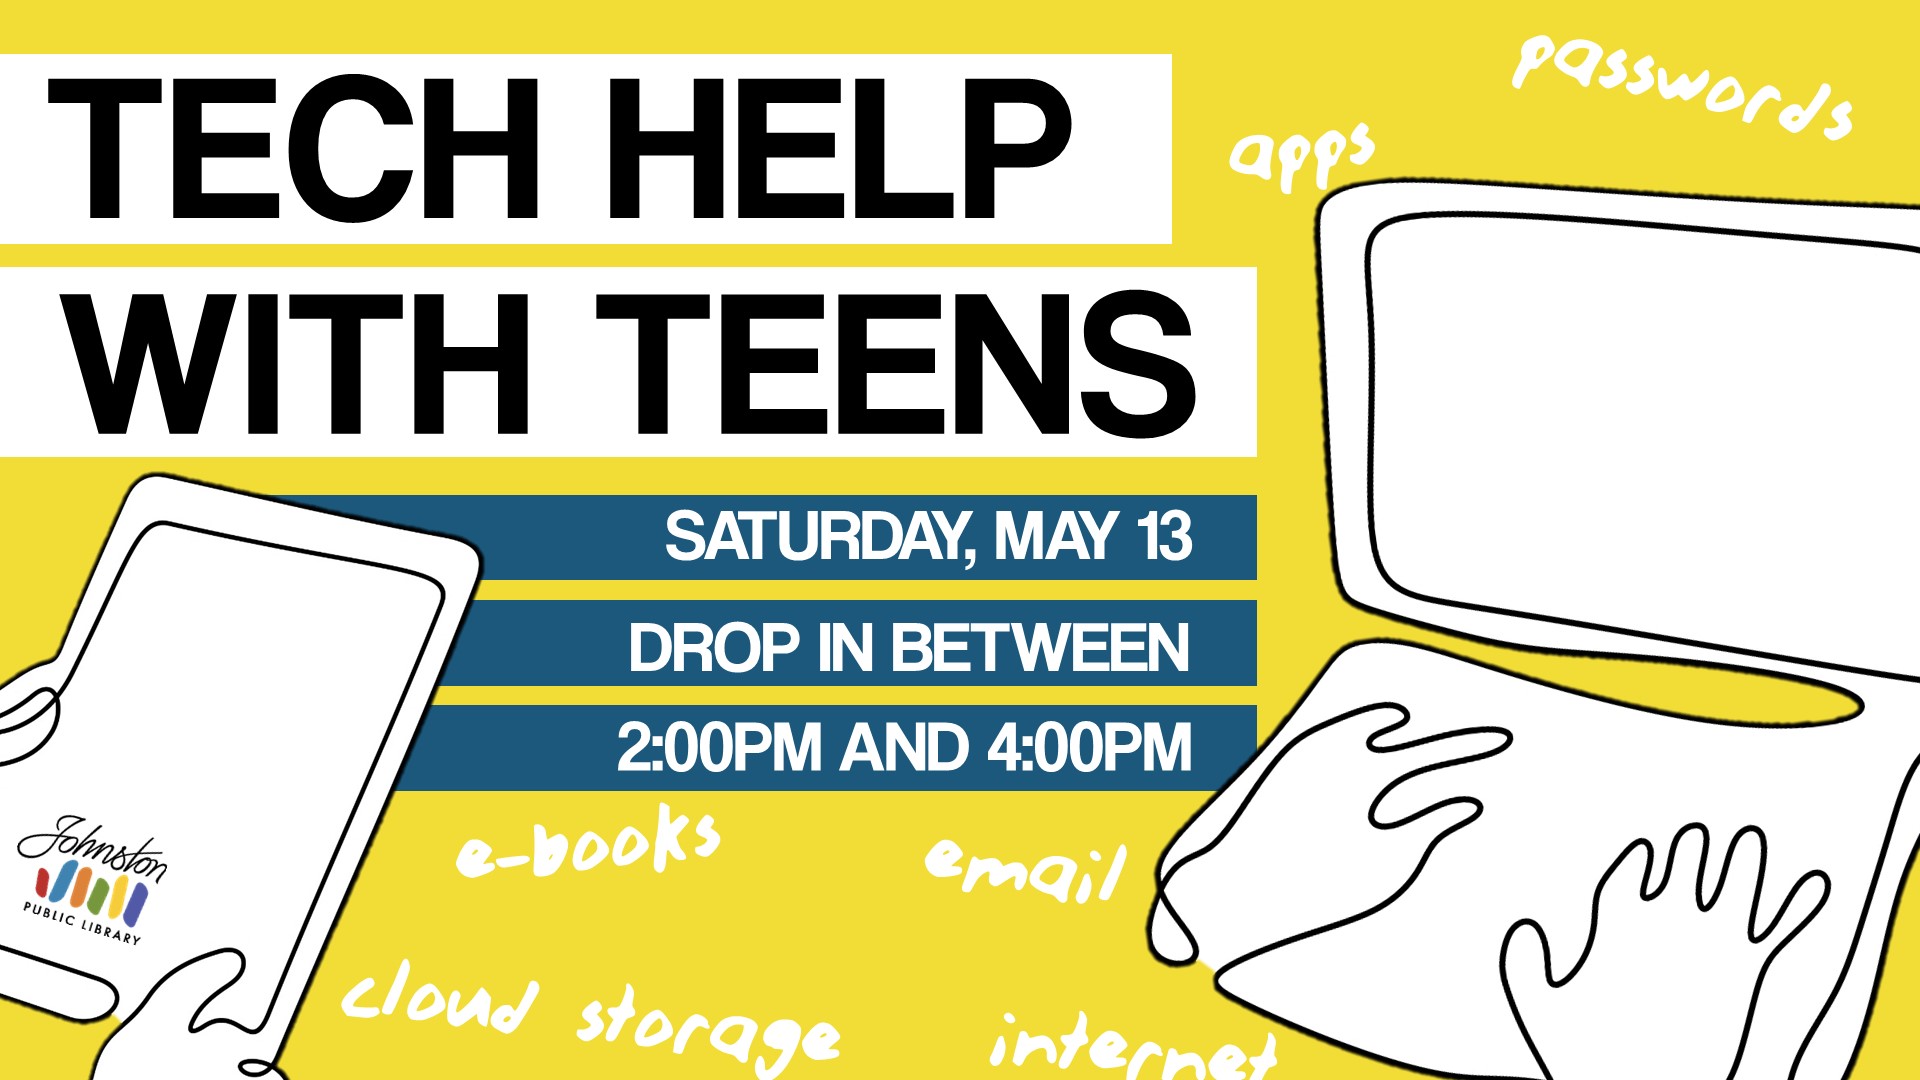 Tech Help with Teens May 13th from 2 to 4 pm in the Whisper Room